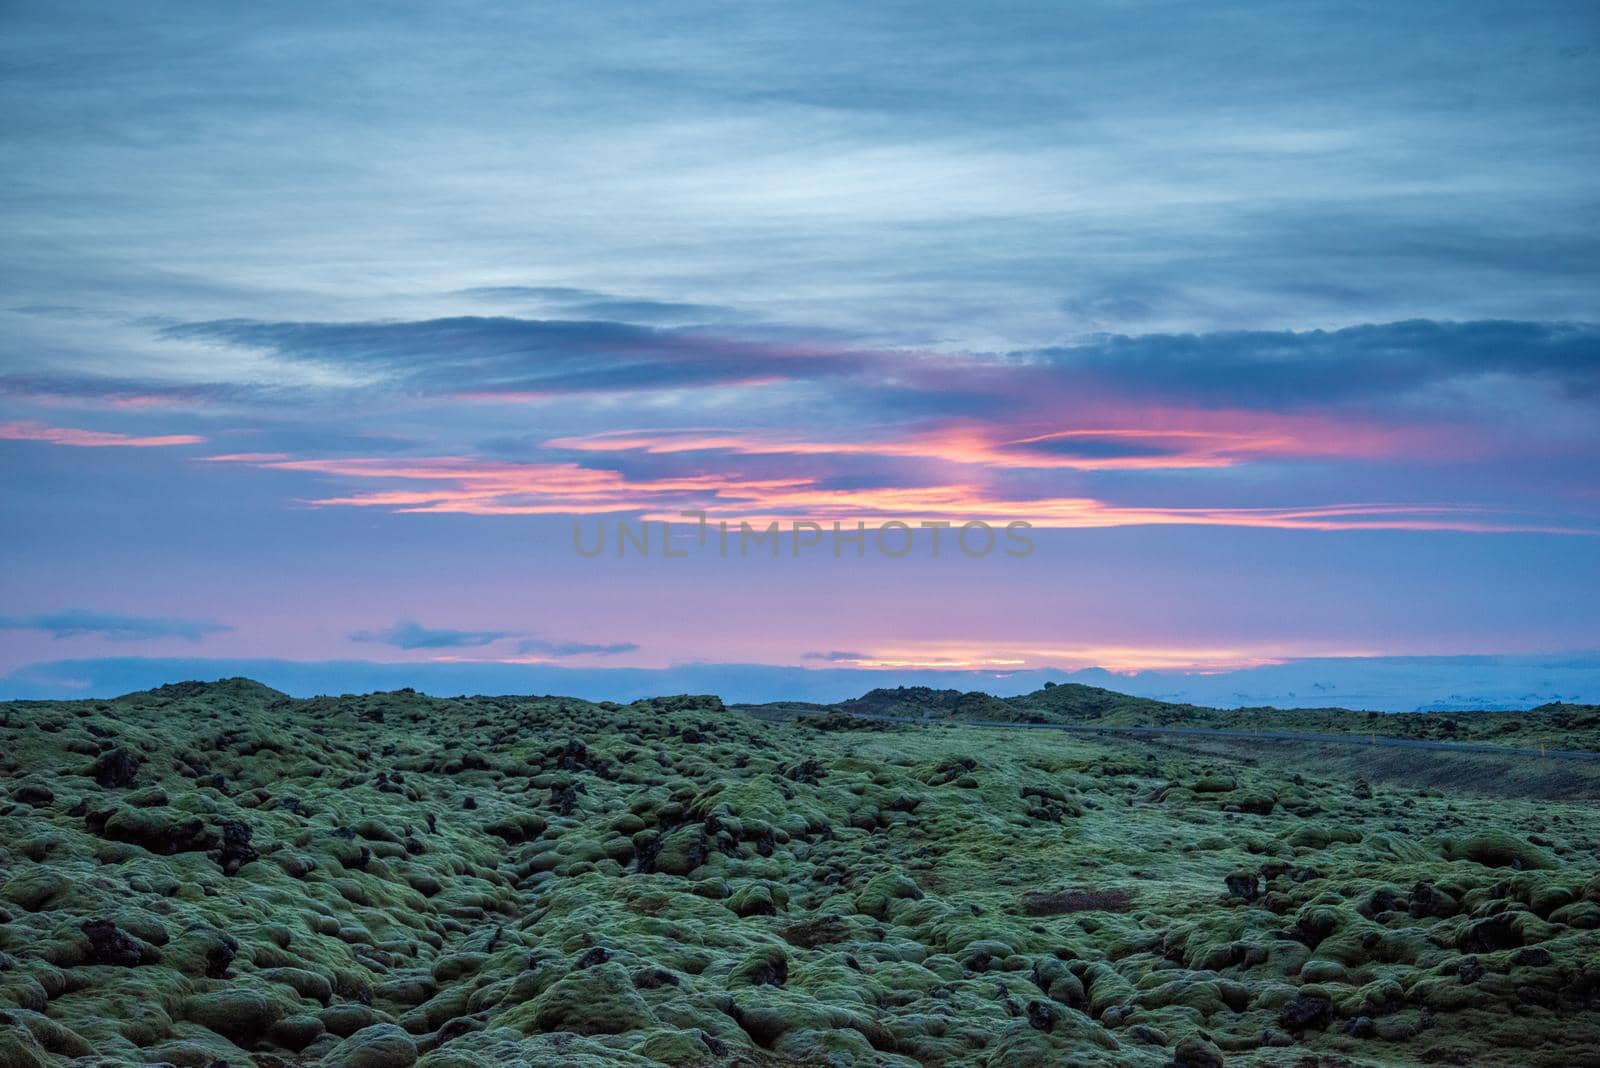 Icelandic landscape photo at sunset with volcanic rock field covered in green moss with a pretty purple and pink sky